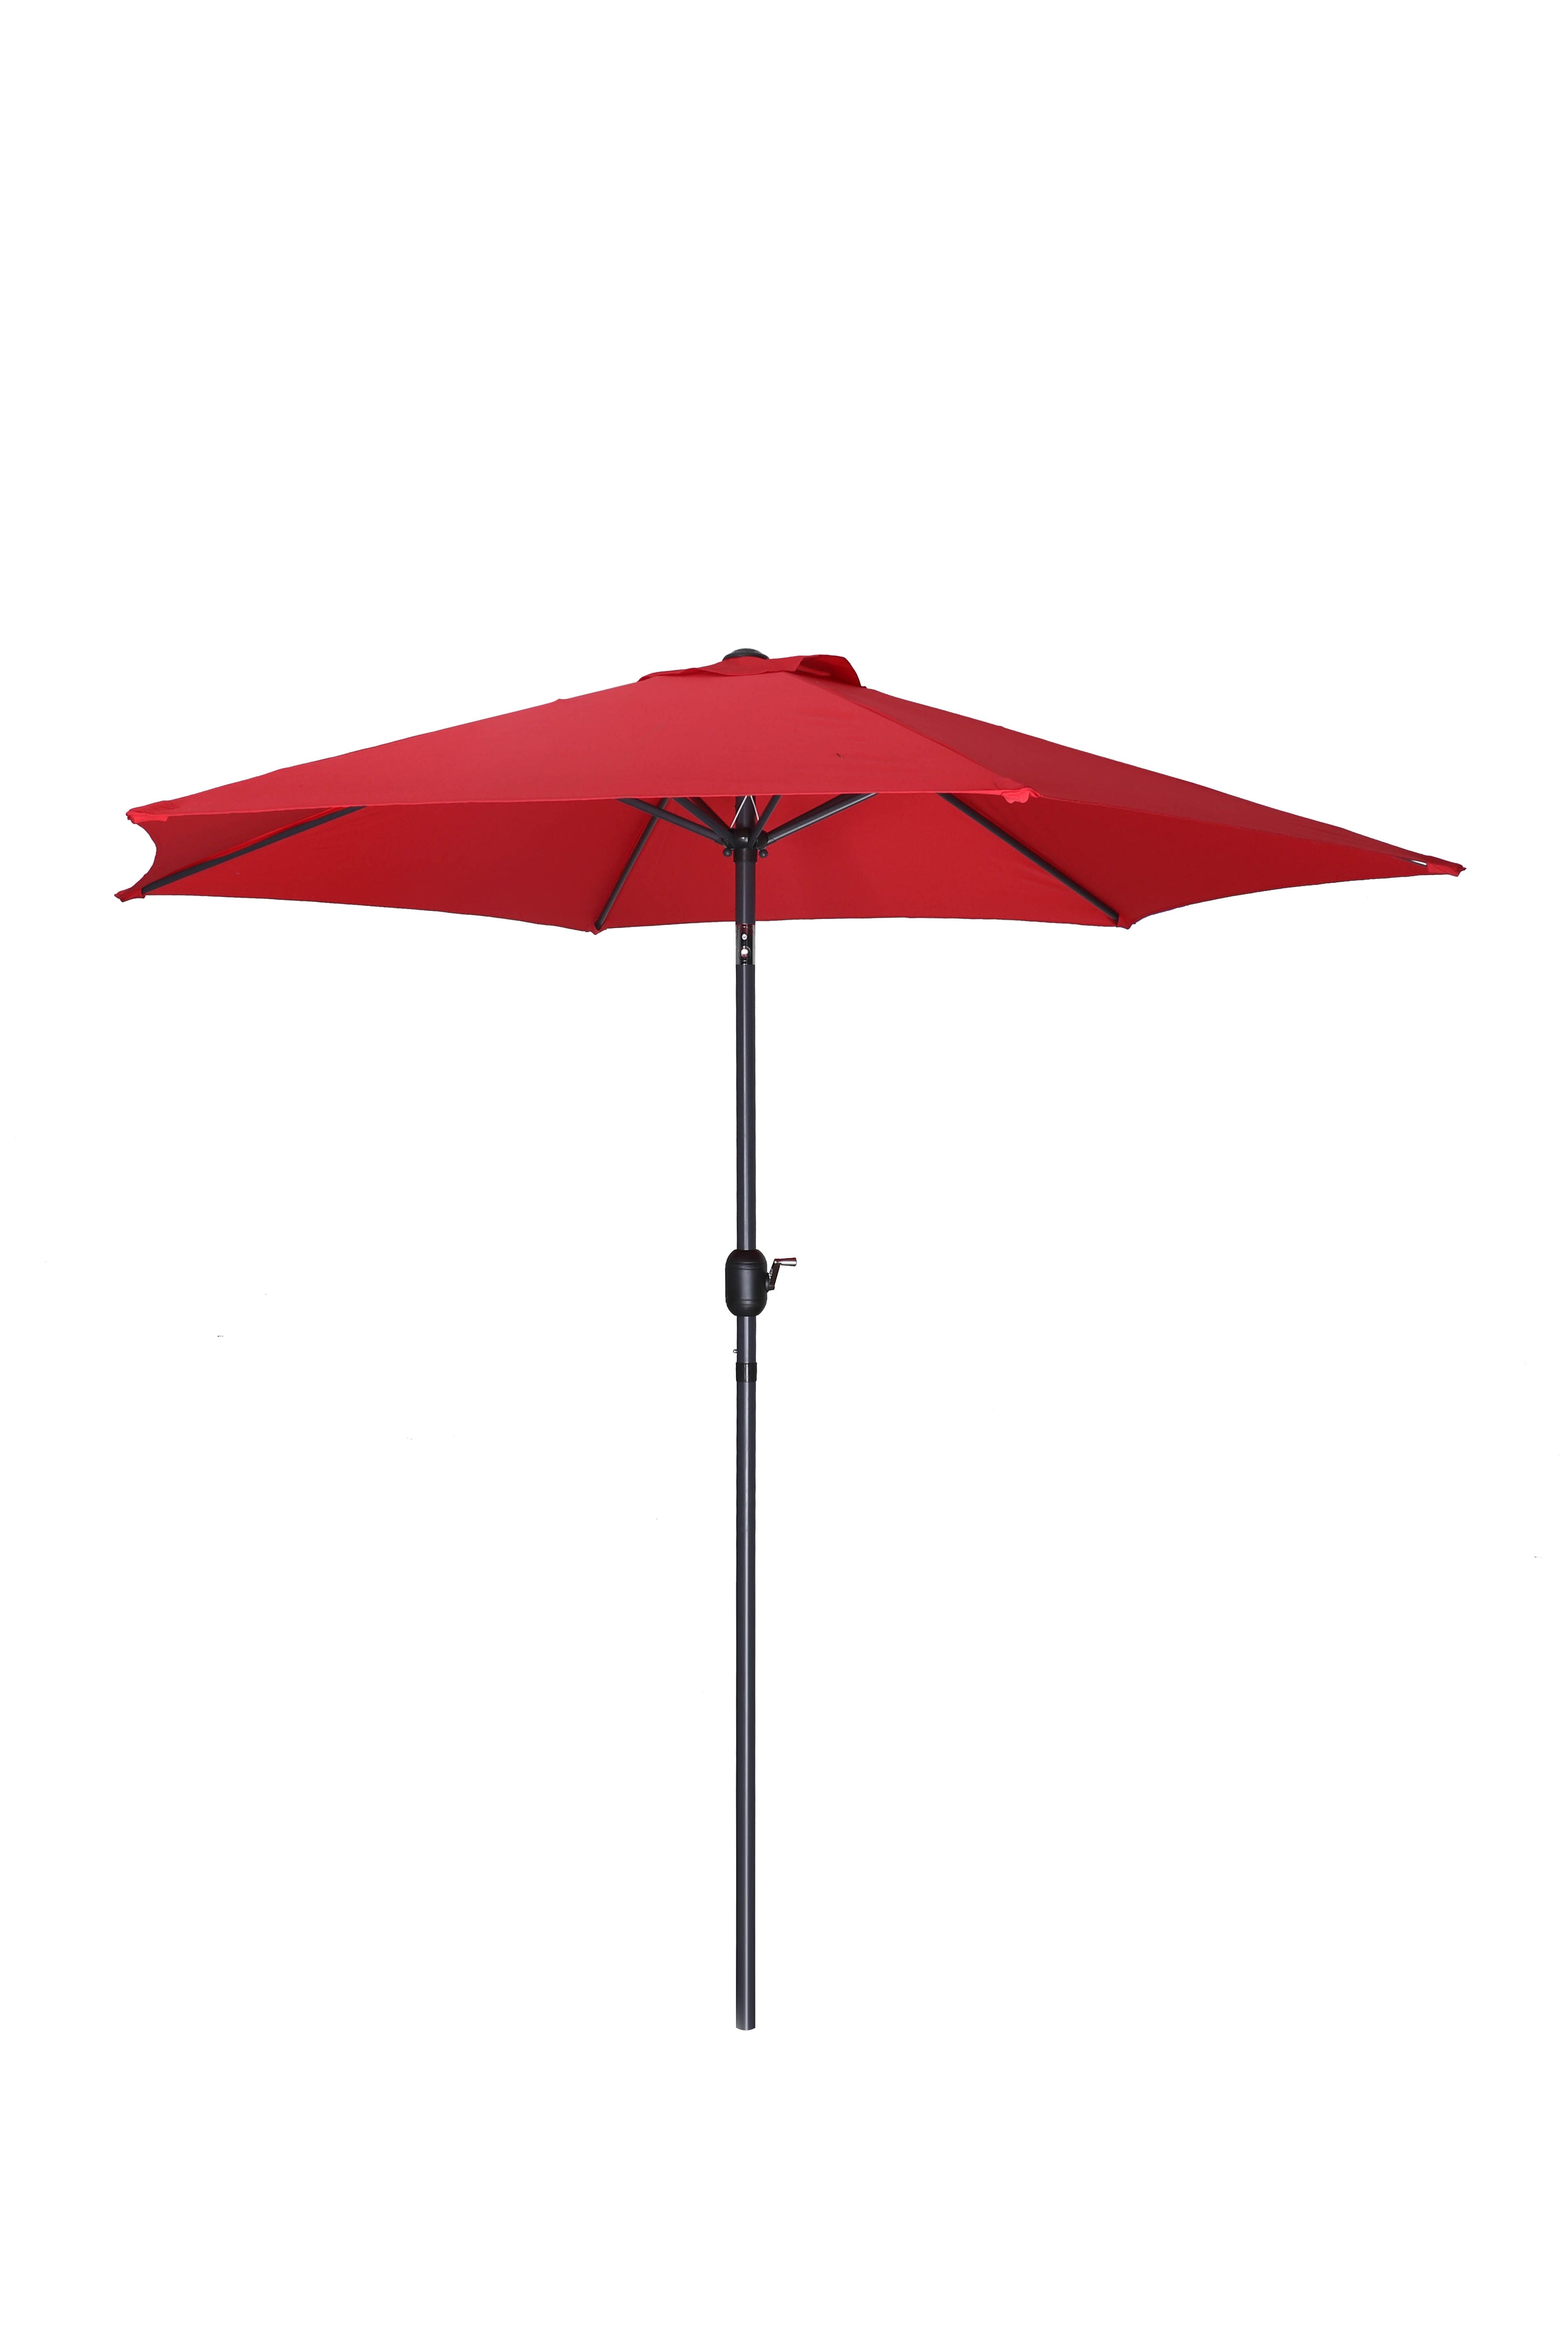 MOSS MOSS-T1204R - Red table umbrella 9', Alu Pole, Cover included